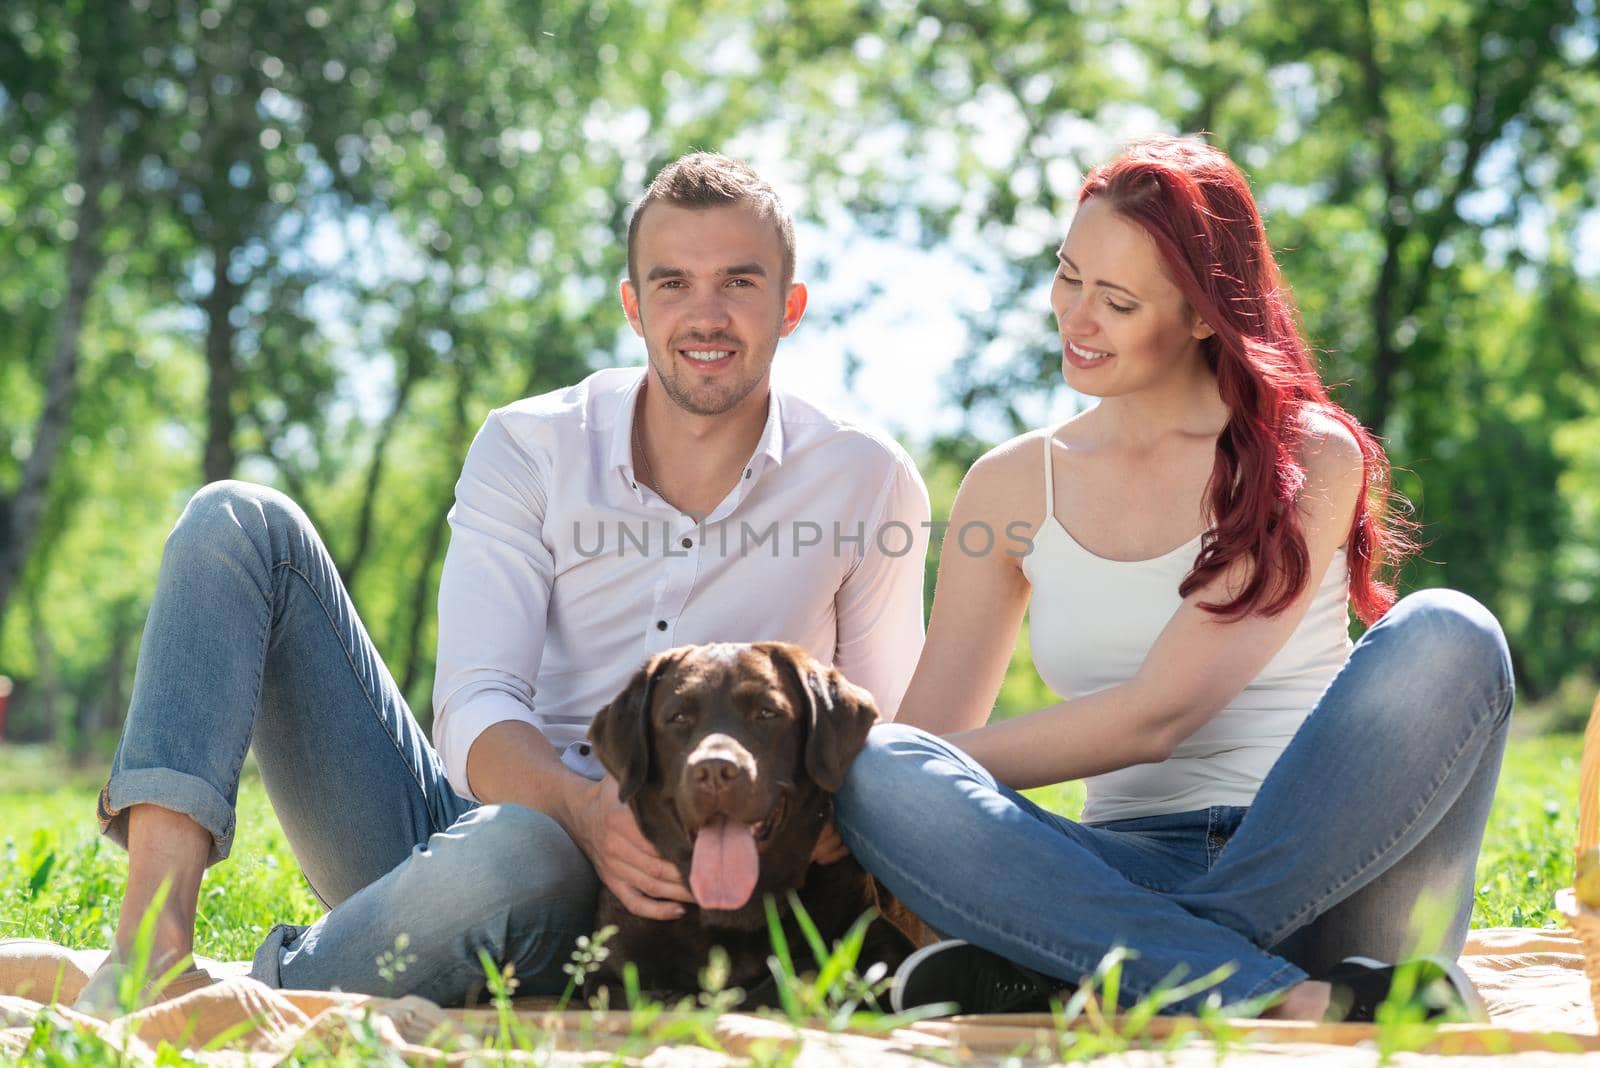 A couple and their dog in the park. Spending time with friends